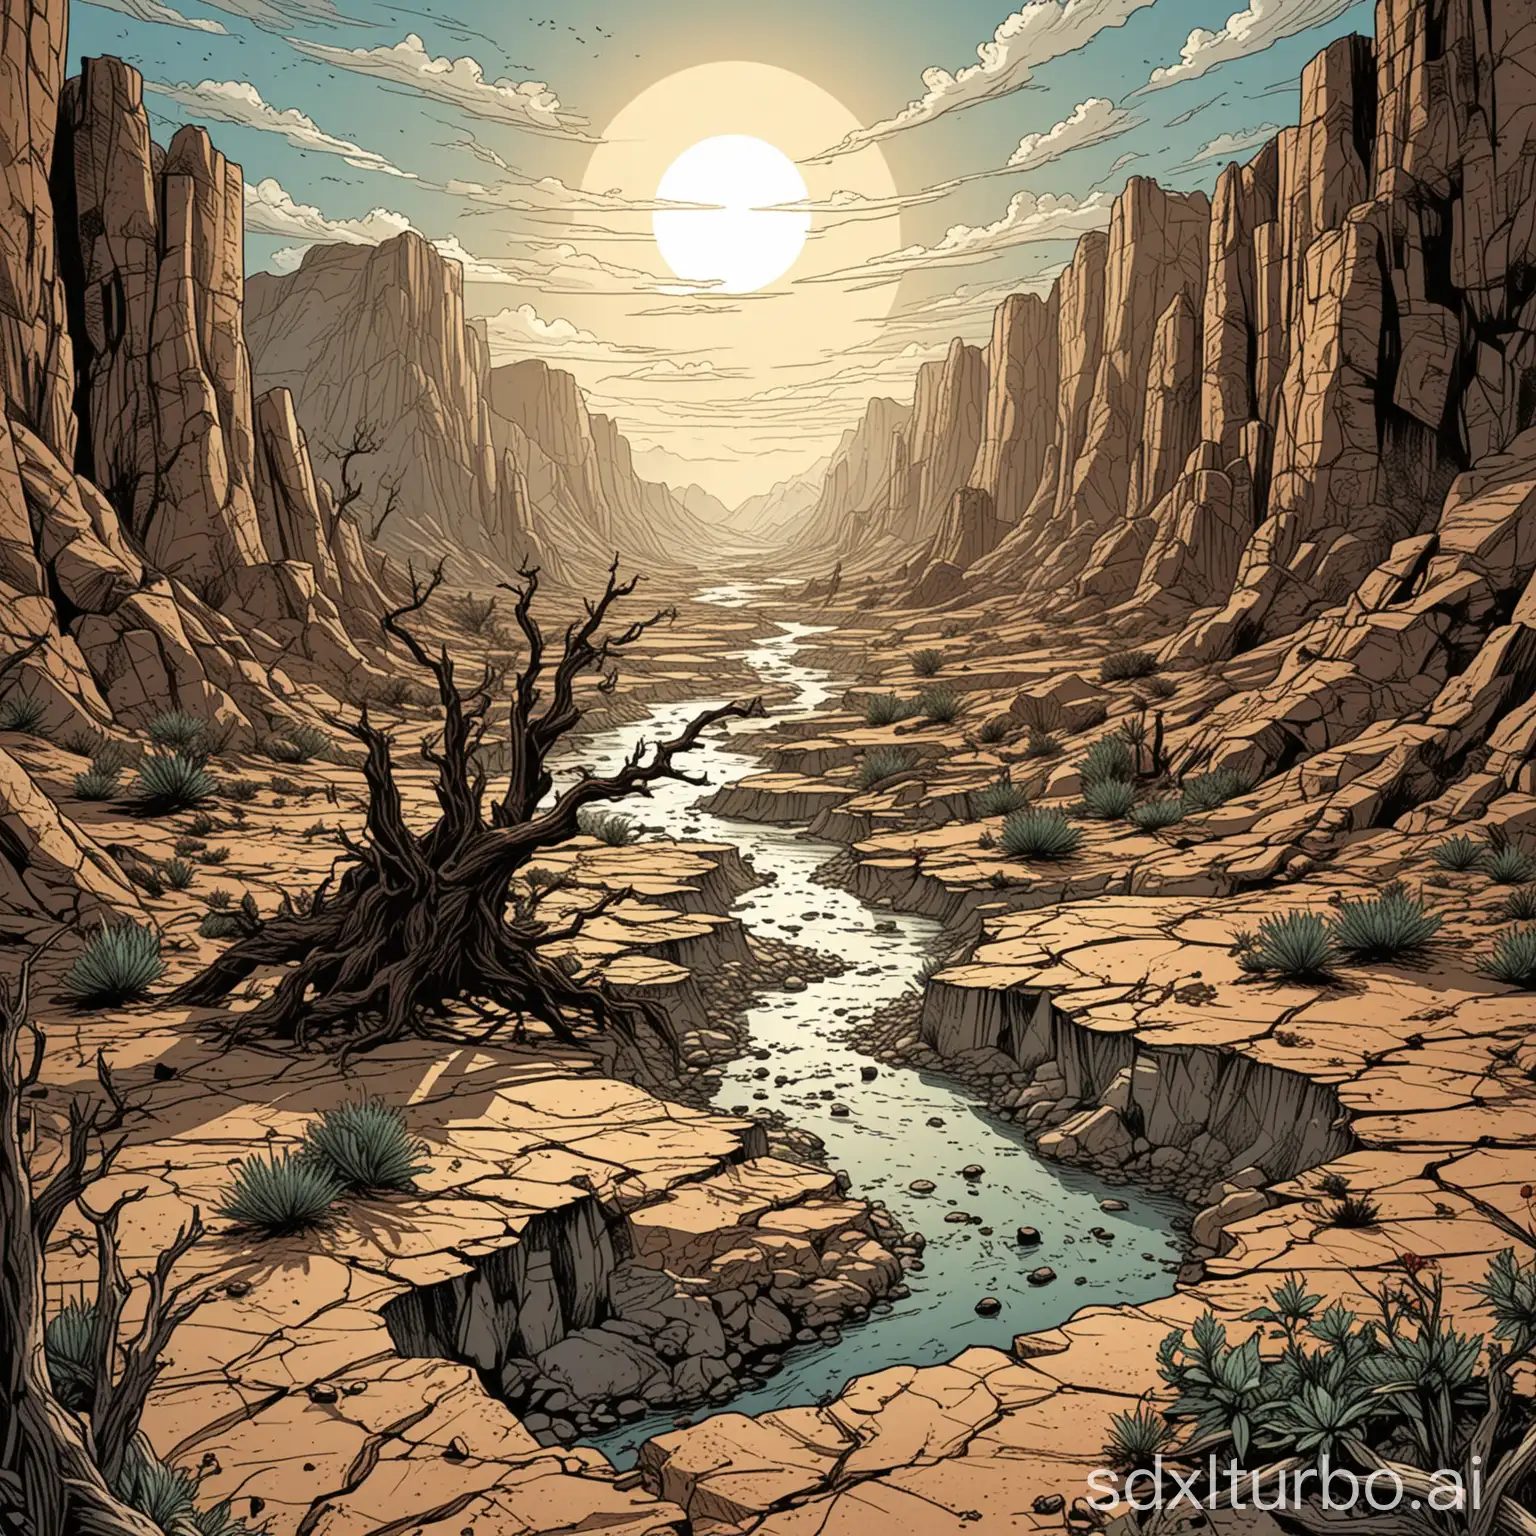 comic book style, Visual: A dry, desolate landscape with cracked earth and wilting plants. A large, menacing creature is coiled around a mountain or blocking a river. Details: The sky is clear with a harsh sun, and living beings, including humans, are shown suffering from the drought. Trees are leafless, and rivers are dry.